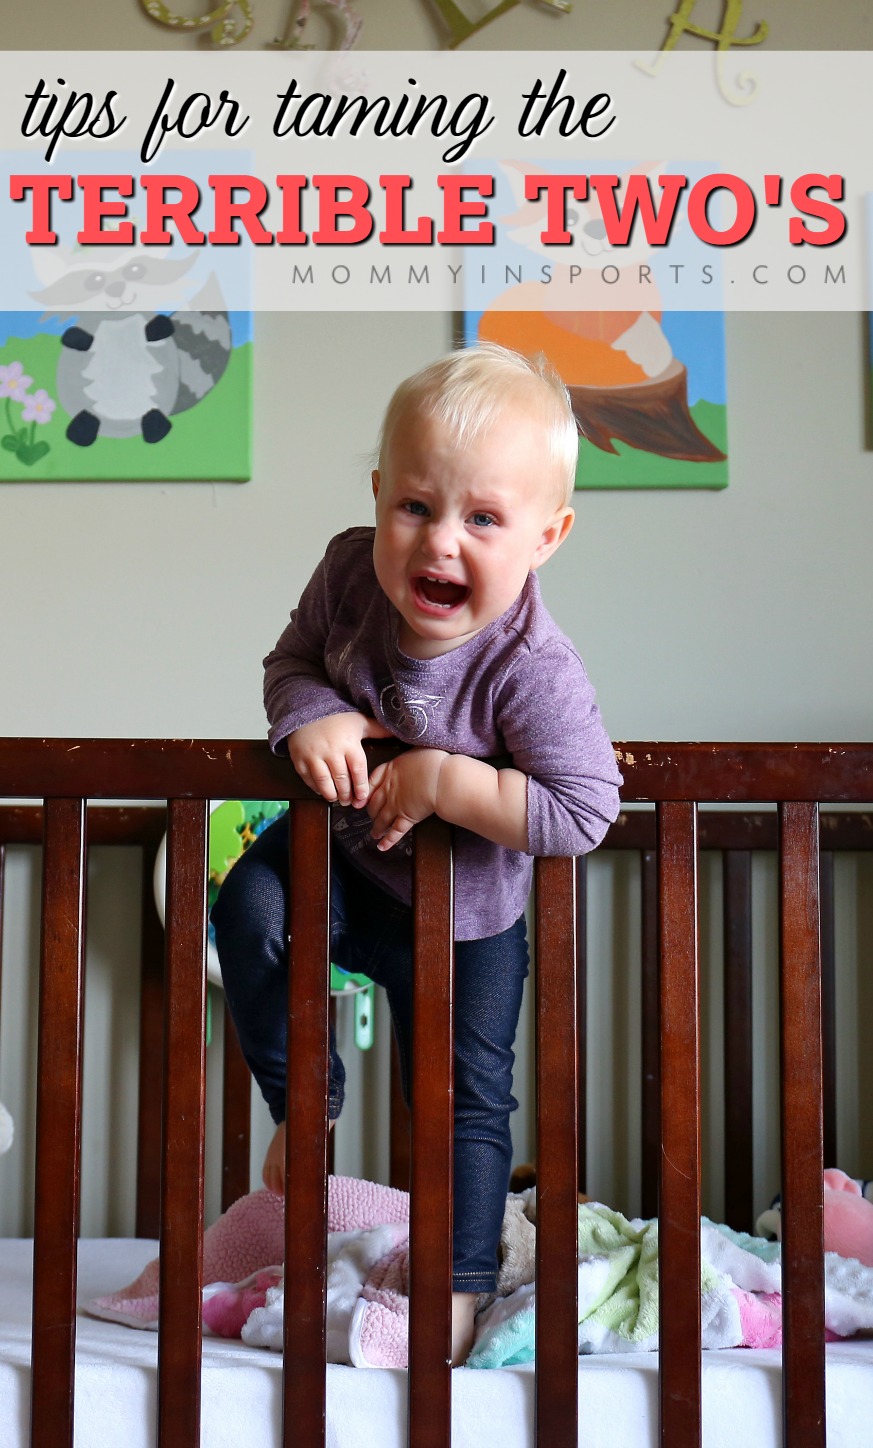 Do you struggle with your toddler? Tantrums, mealtimes, and naps...oh my! The Terrible Two's are hard, but you CAN tame them with these tips!